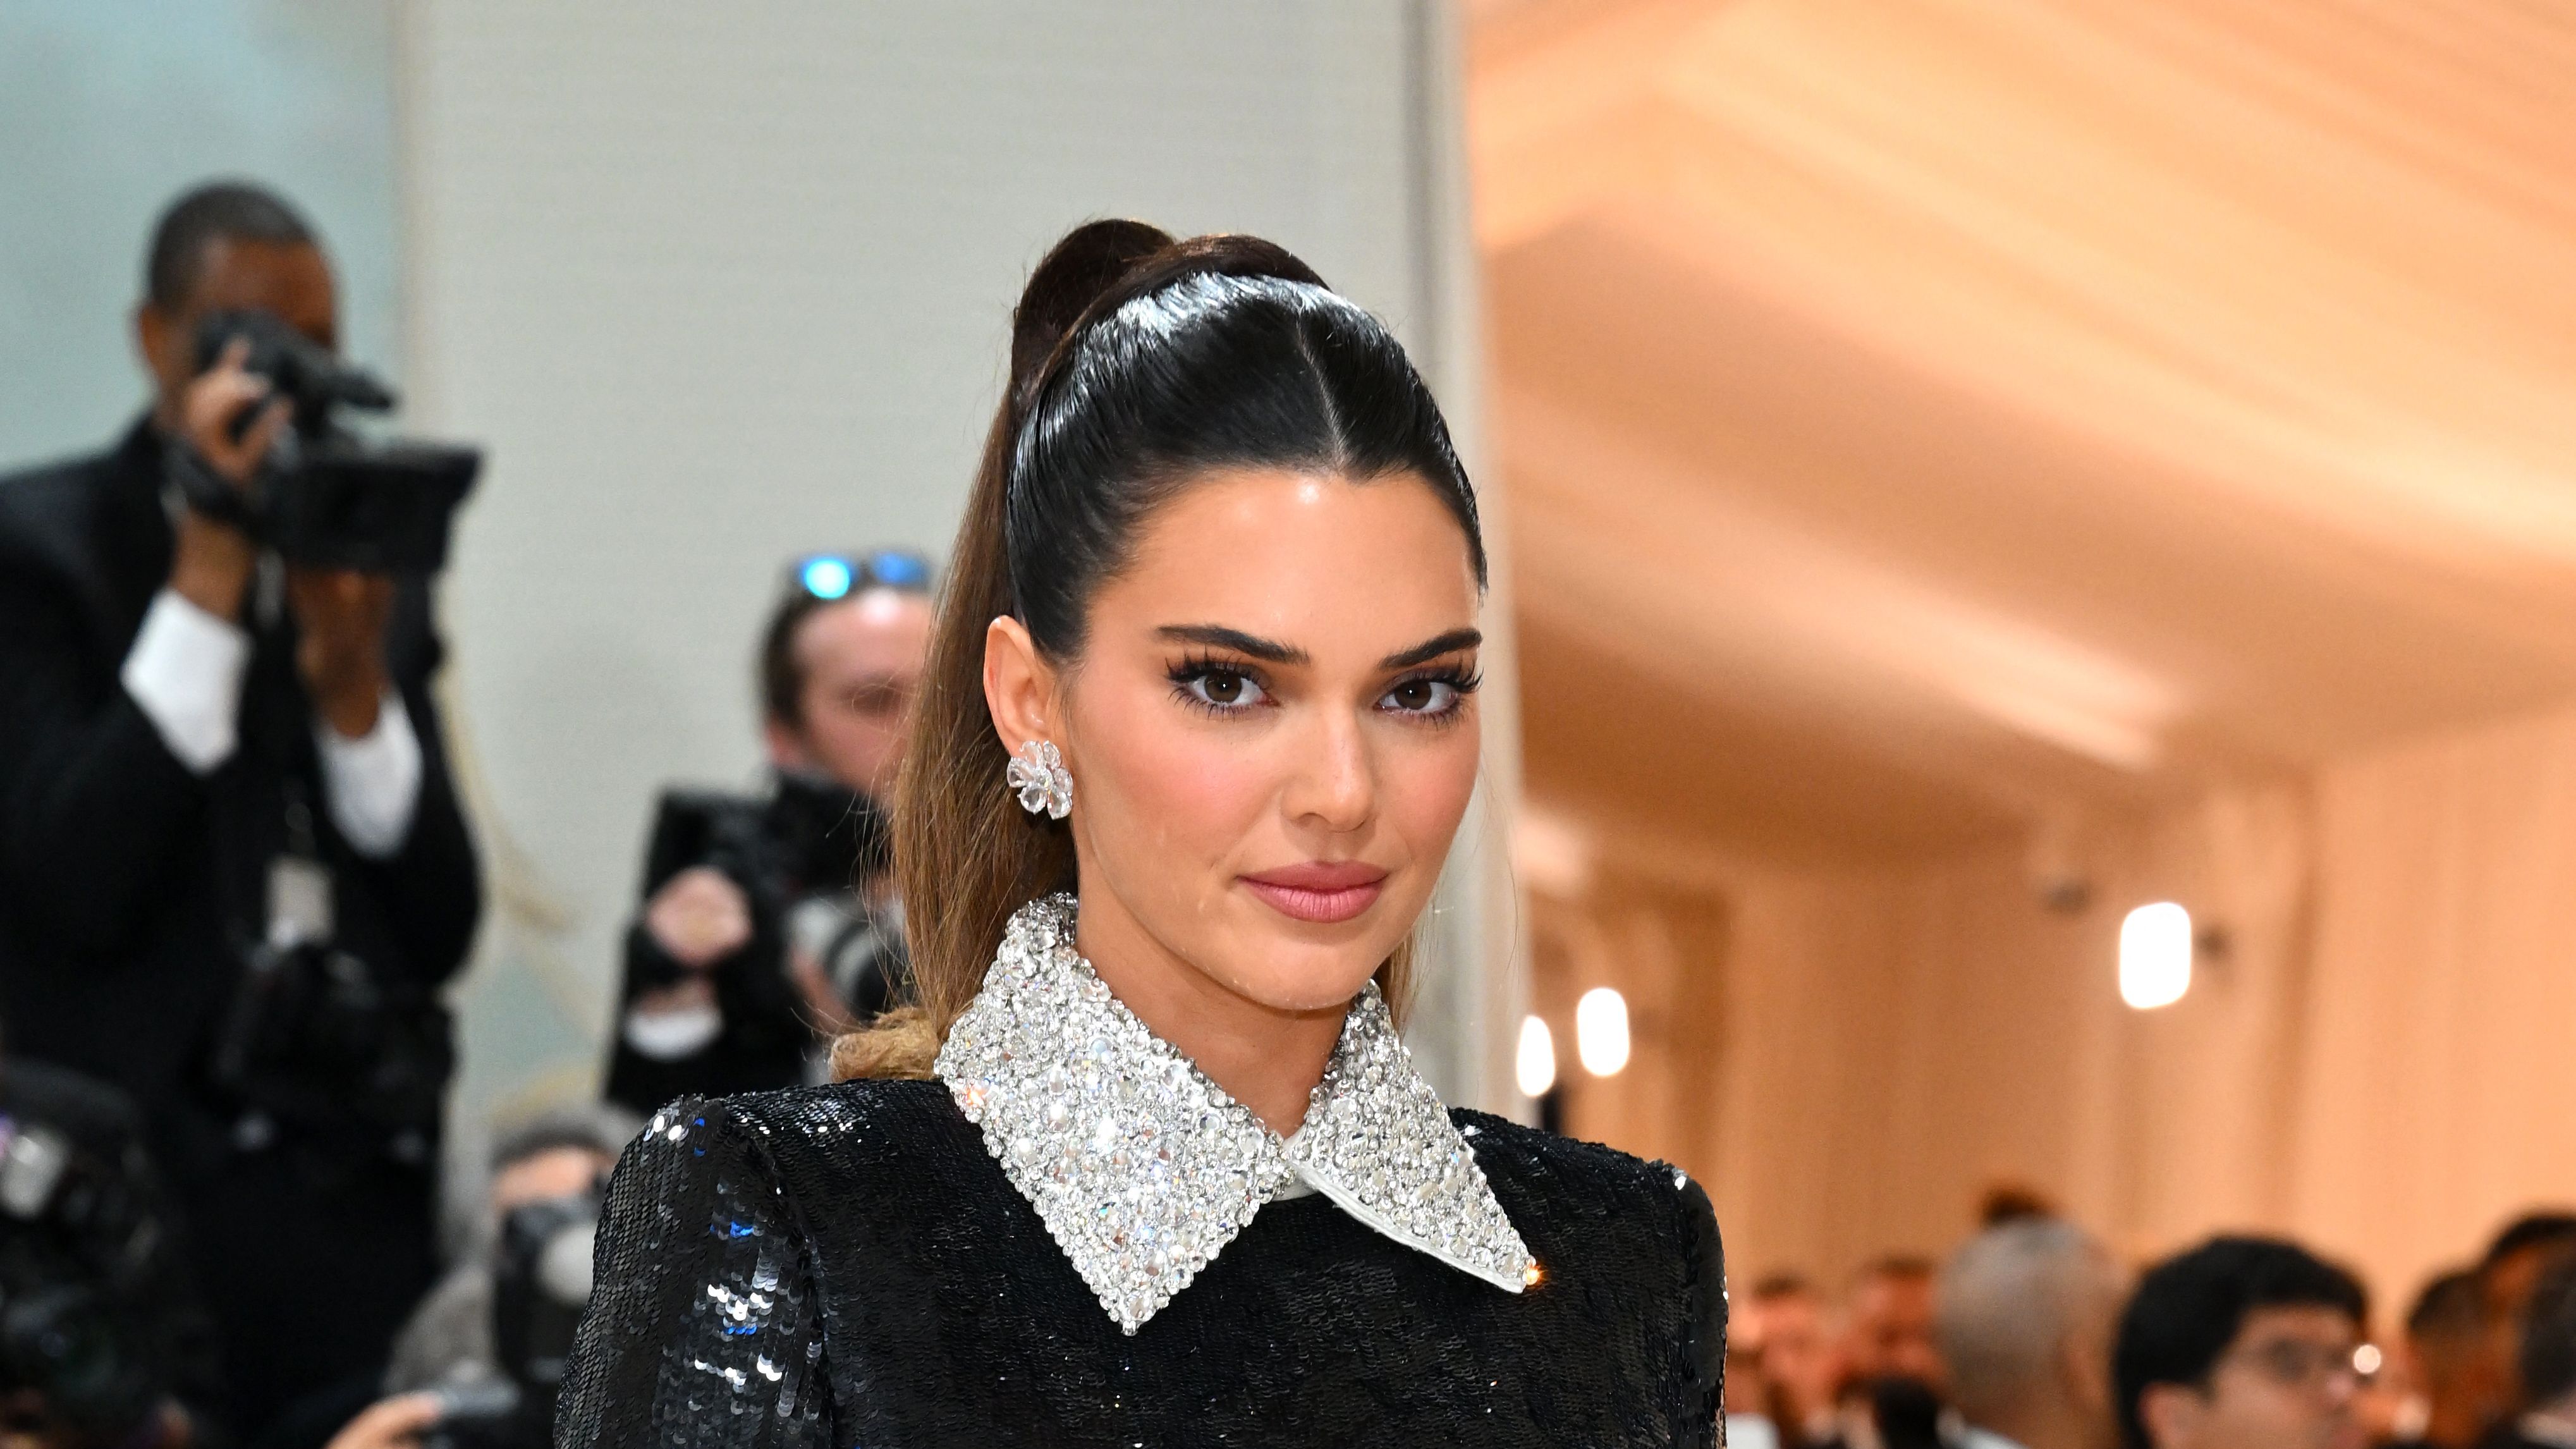 Kendall Jenner Finds a New Way to Wear an Old Classic